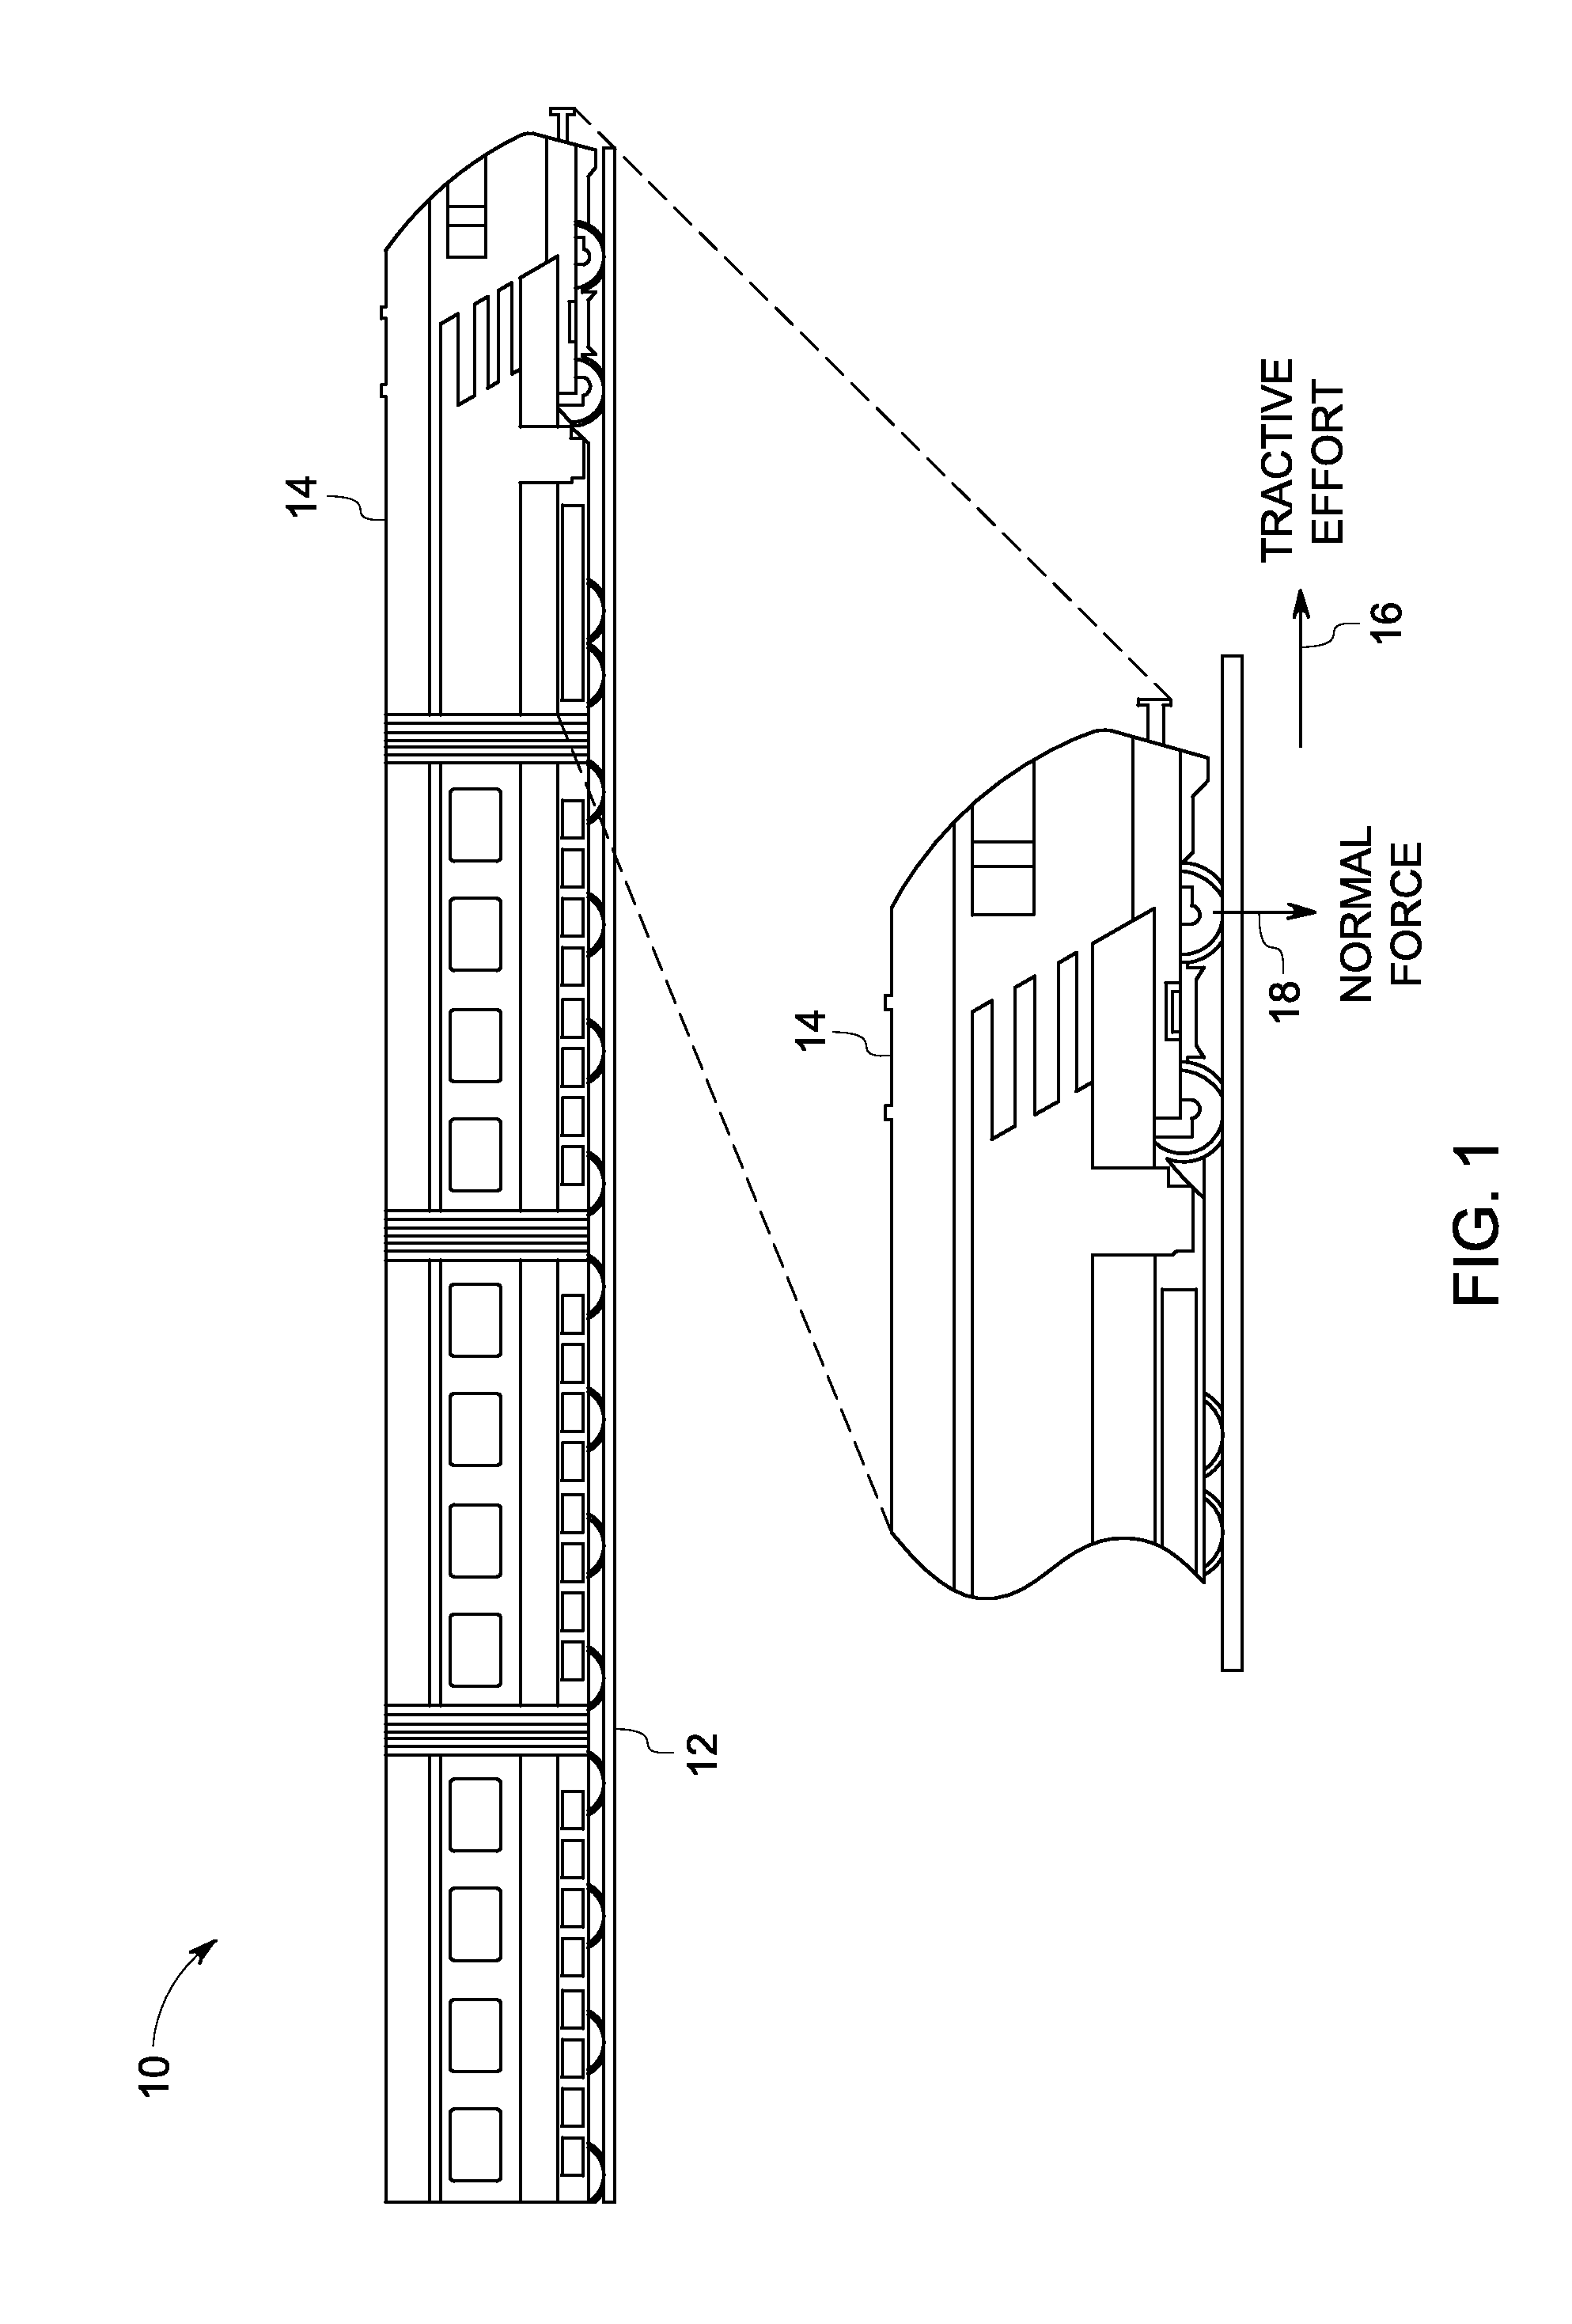 System and method for traction motor control